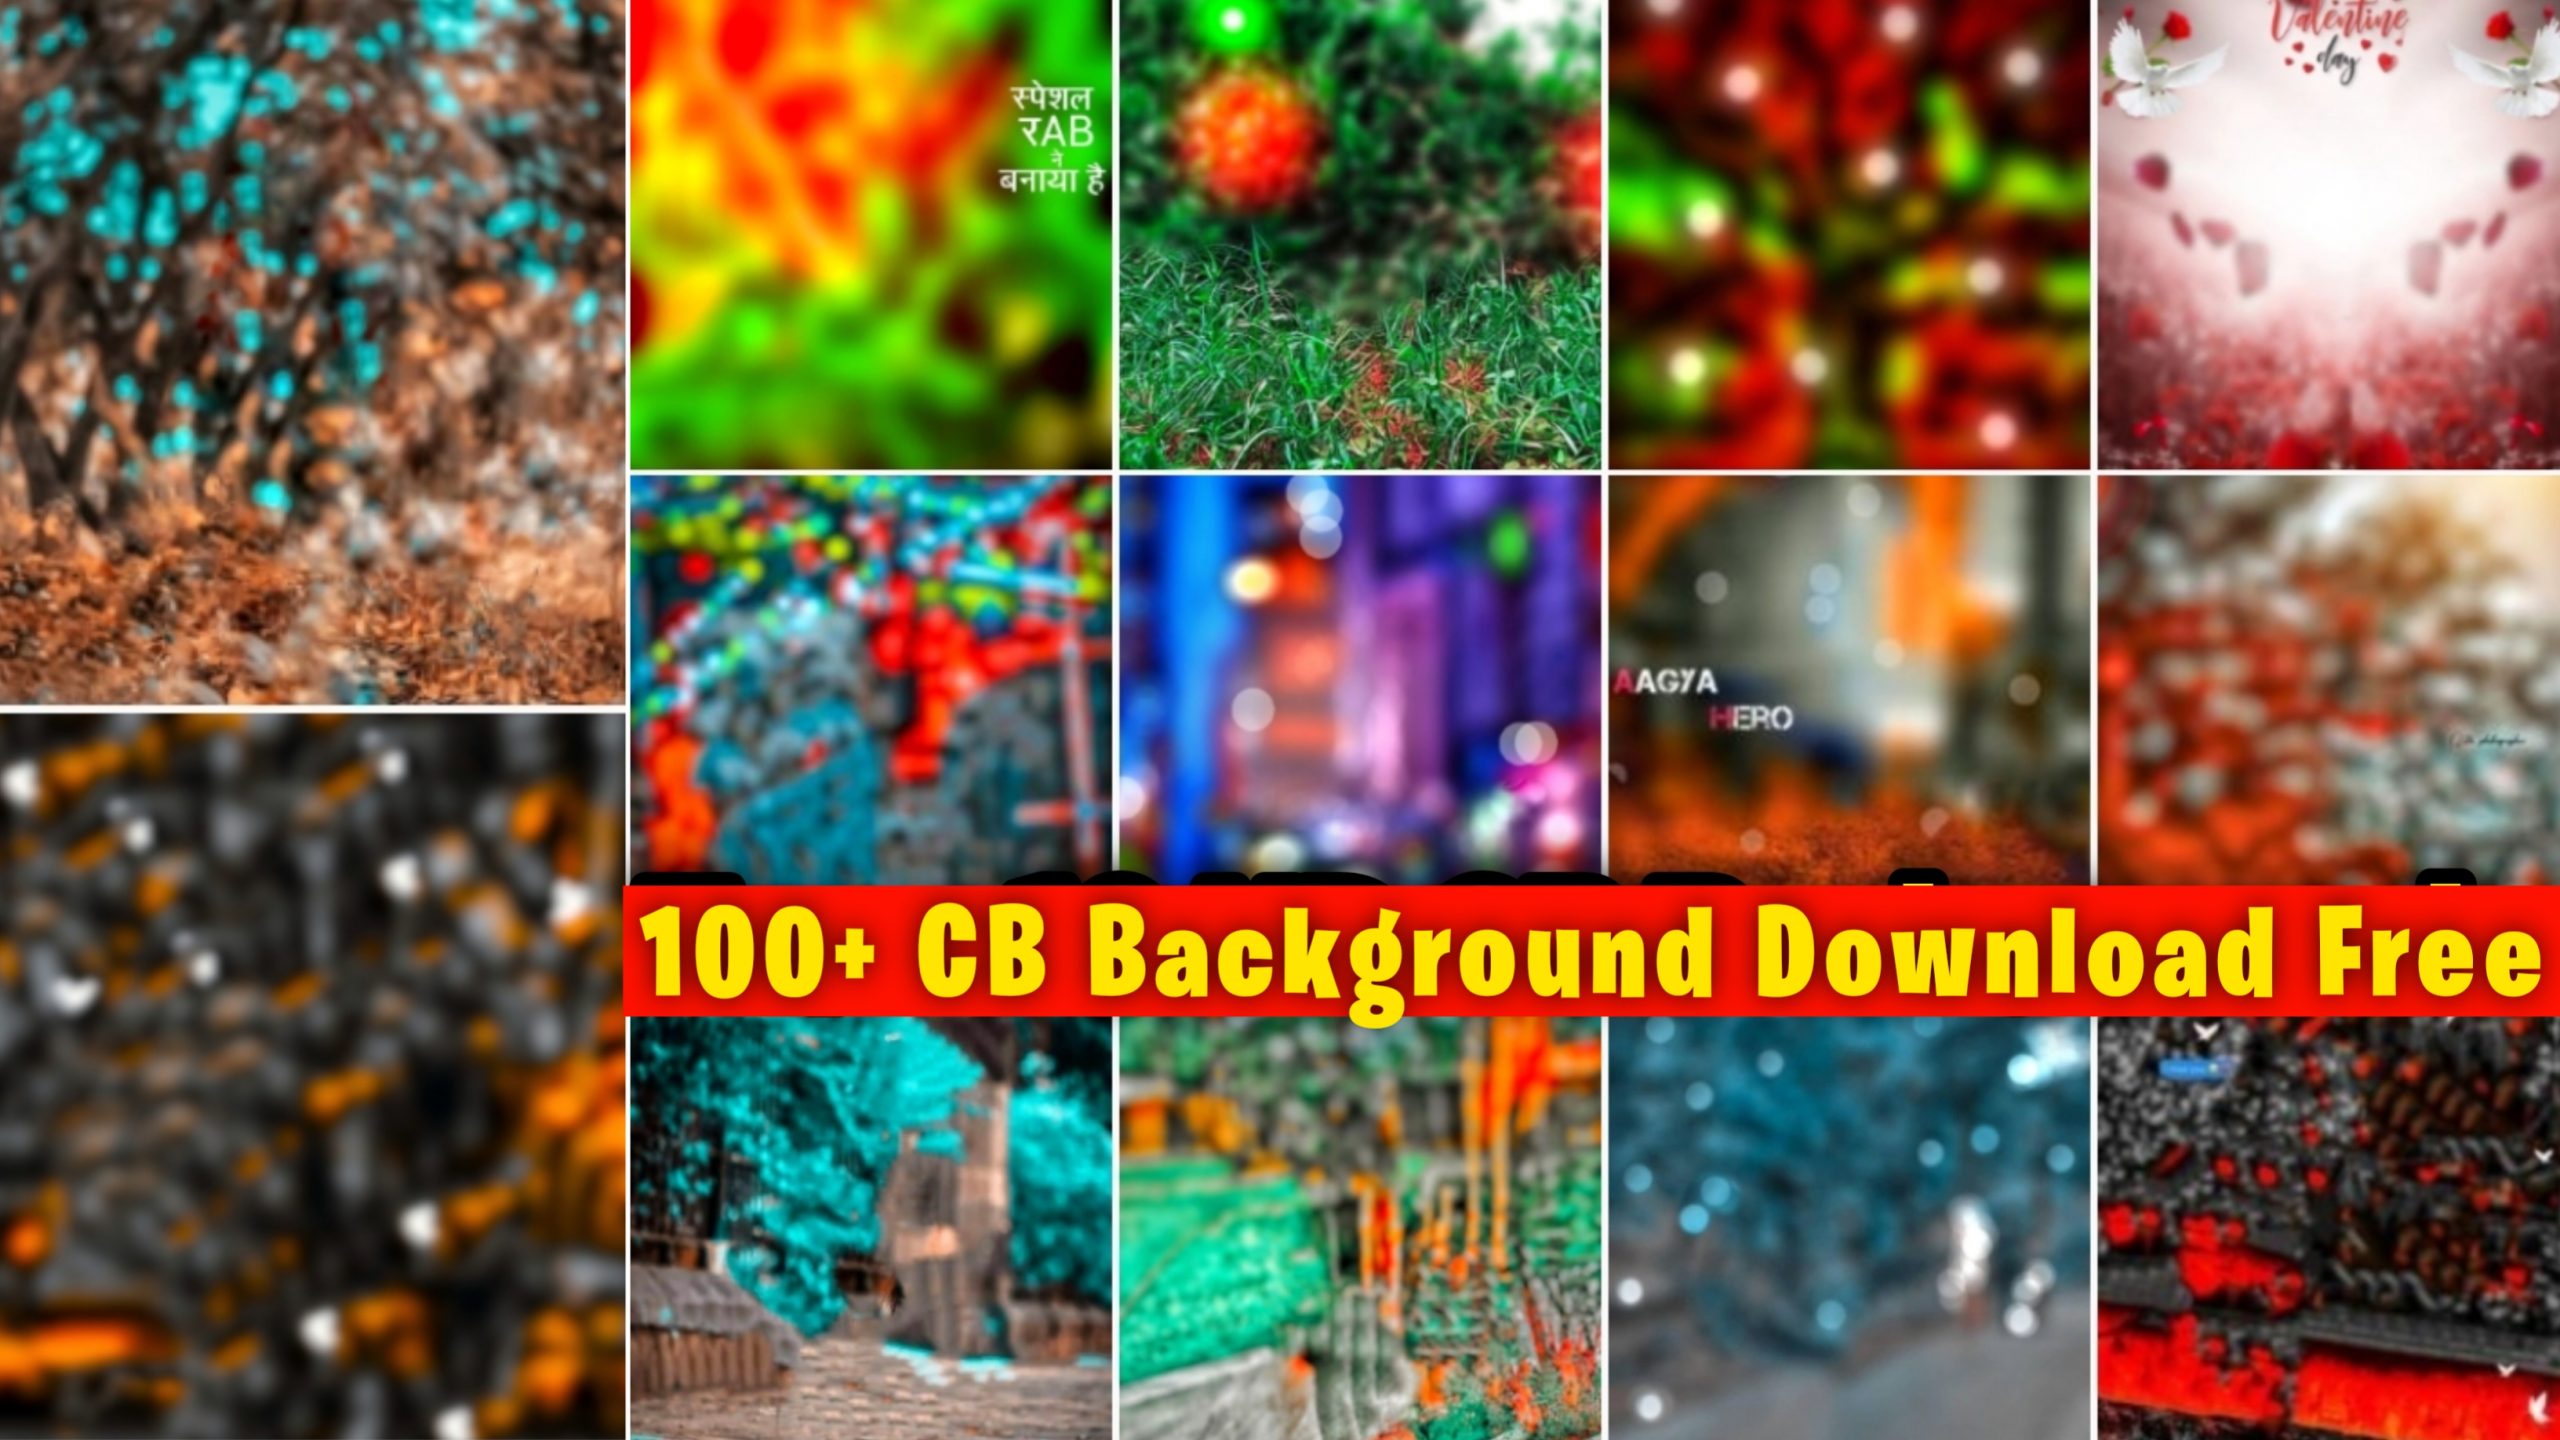  Star CB Editing New Background Download Full HD  2022 Full Hd Background